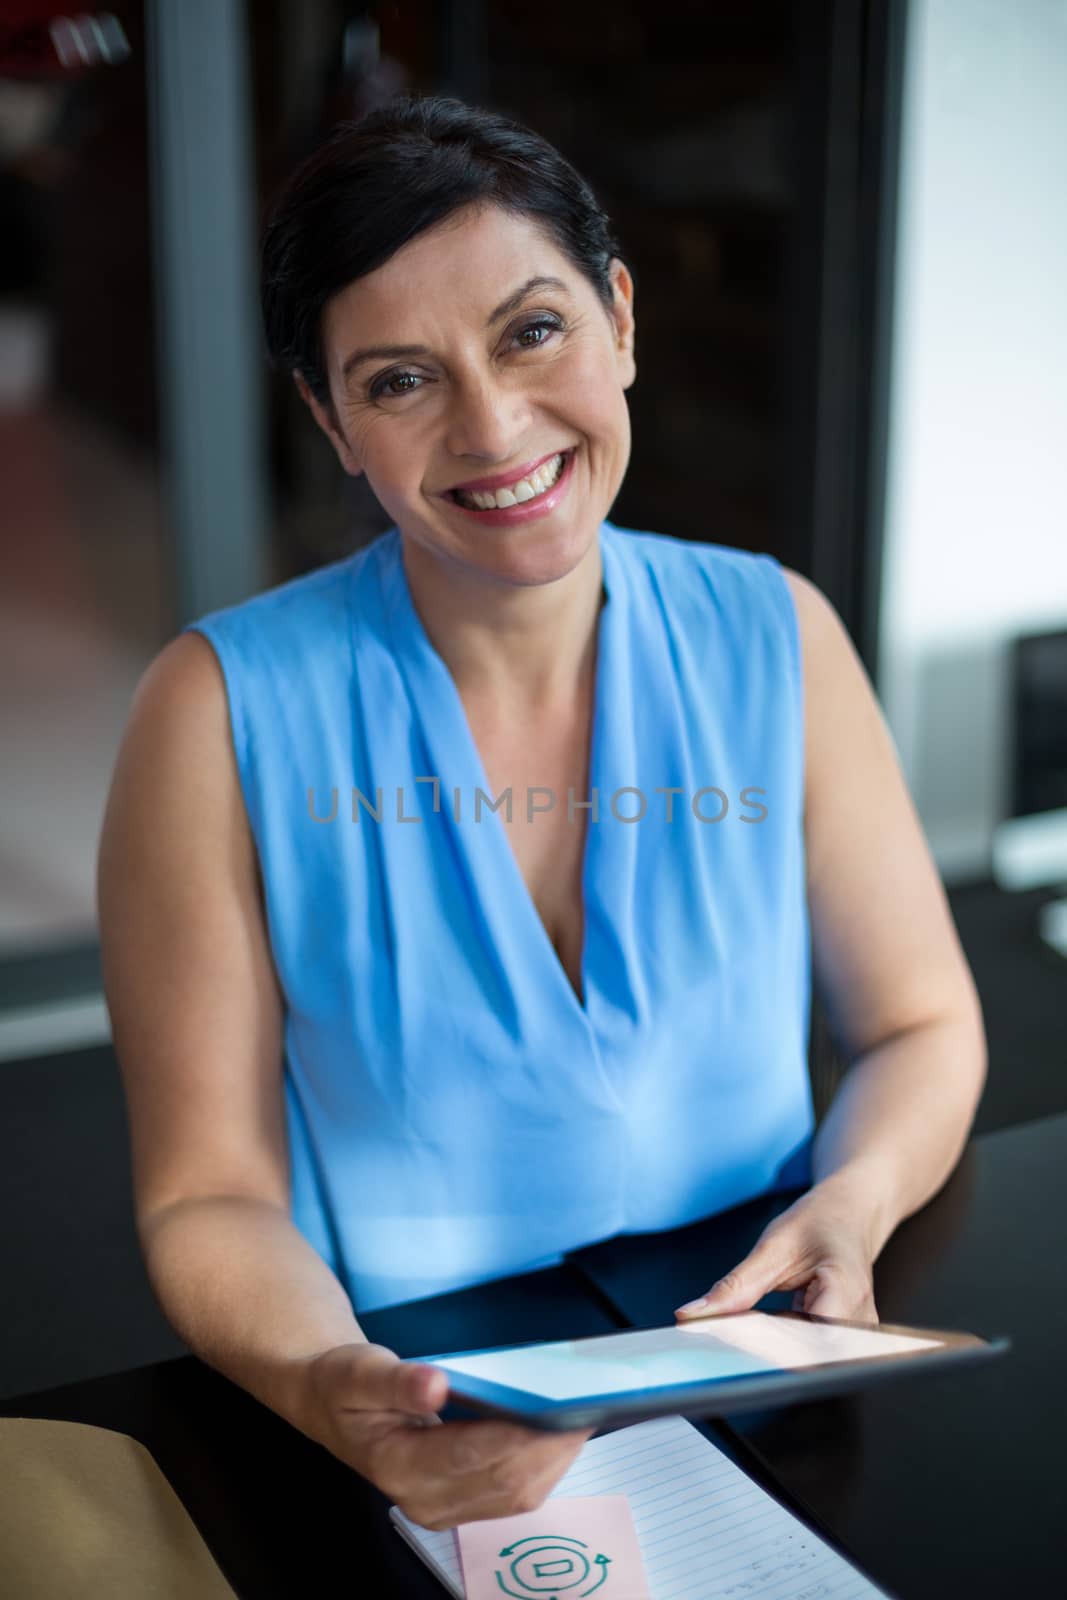 Portrait of smiling business executive using digital tablet in office